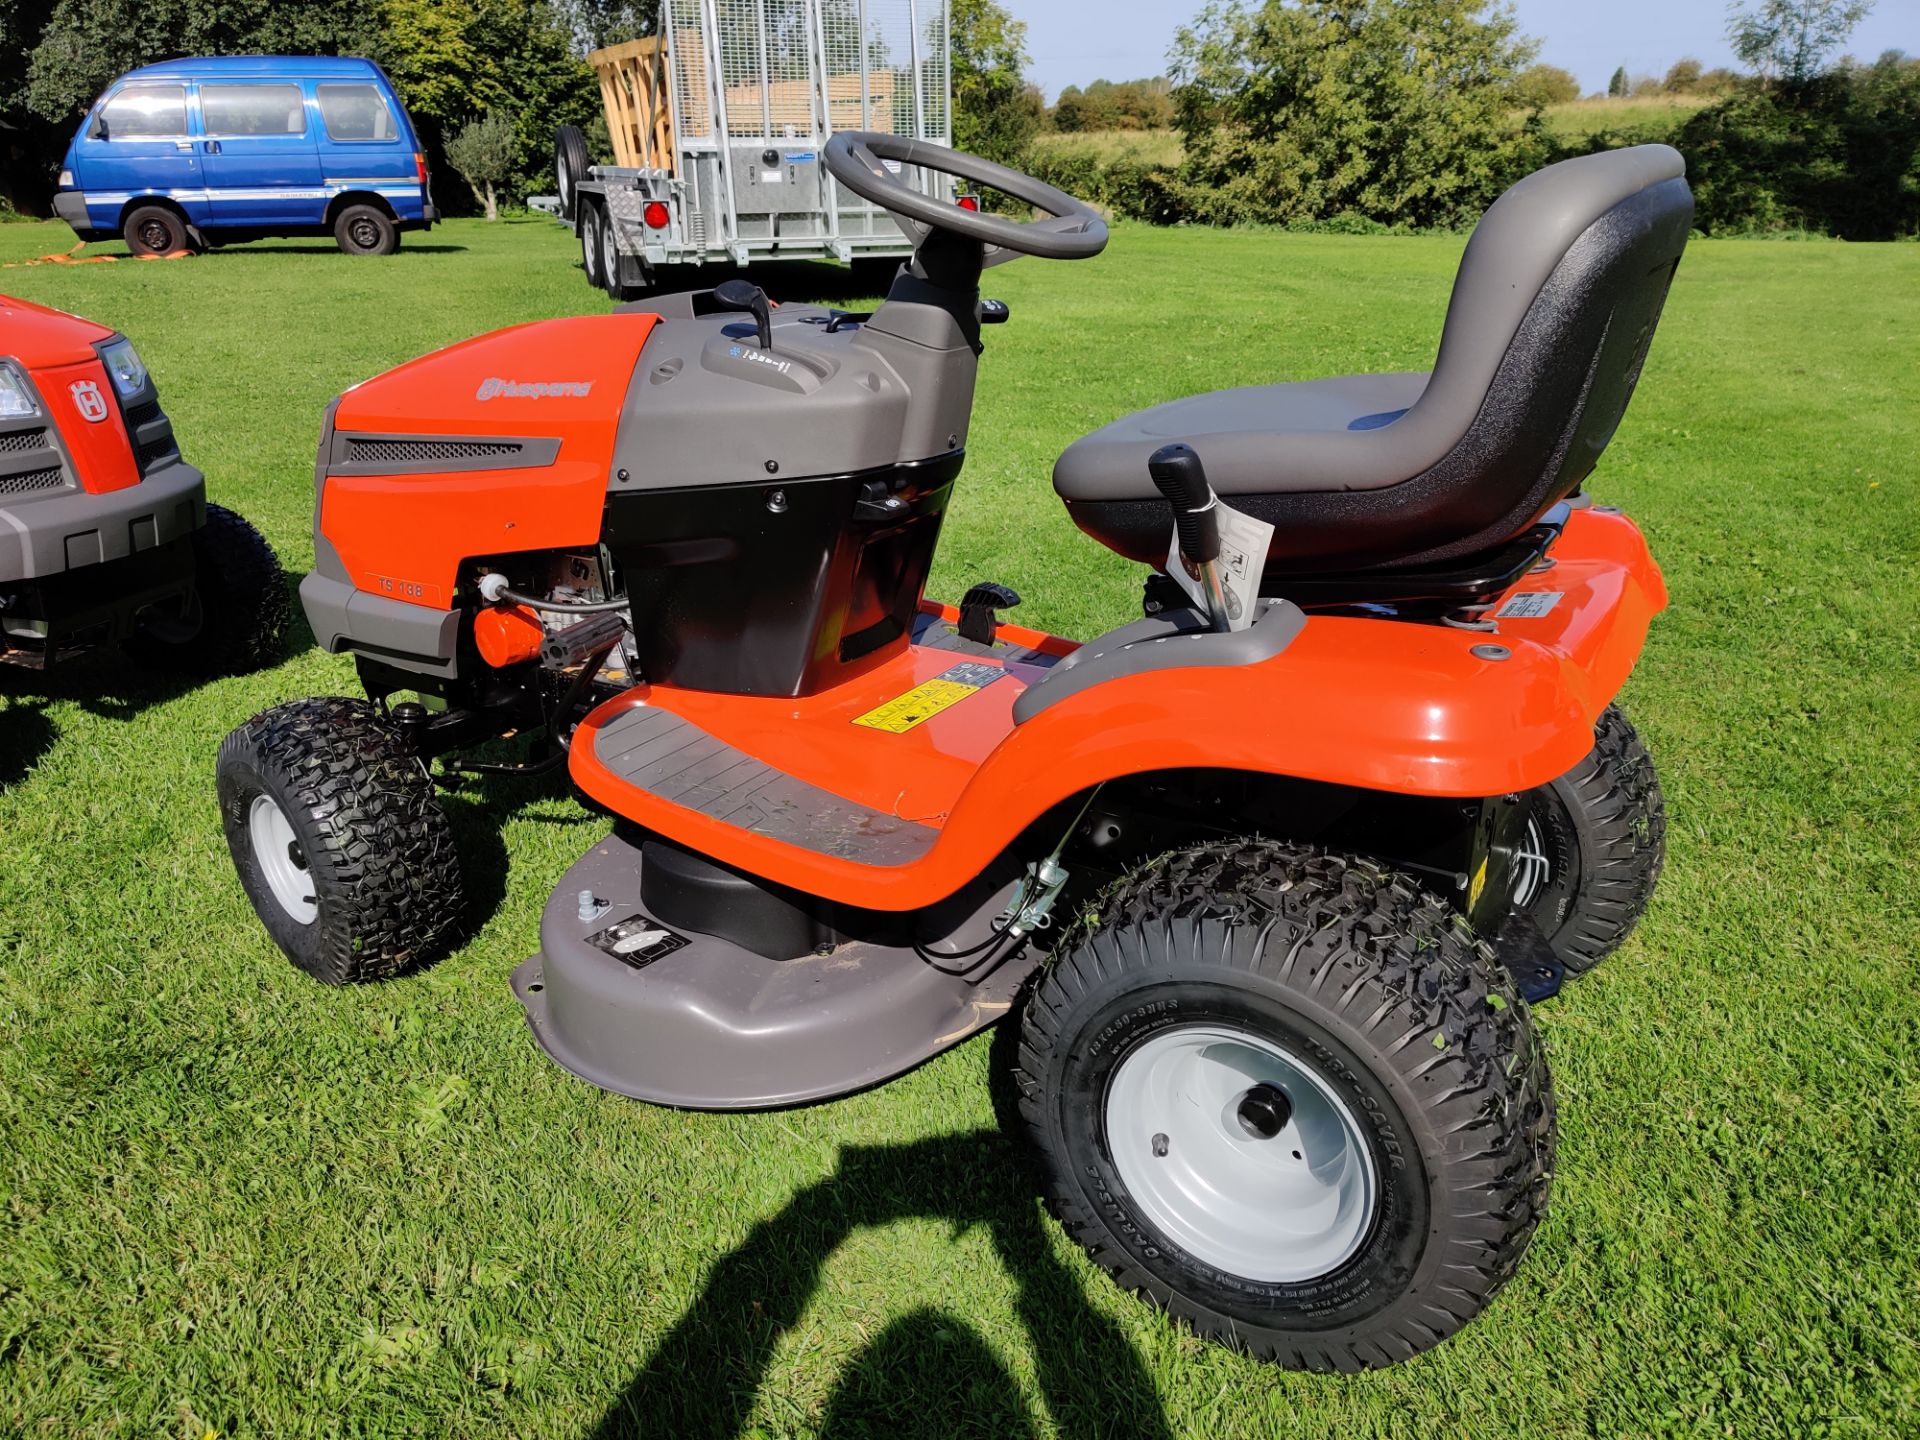 2020 BRAND NEW HUSQVARNA TS138 ROTARY RIDE ON LAWN MOWER (SIDE DISCHARGE) NO COLLECTOR *PLUS VAT* - Image 6 of 9